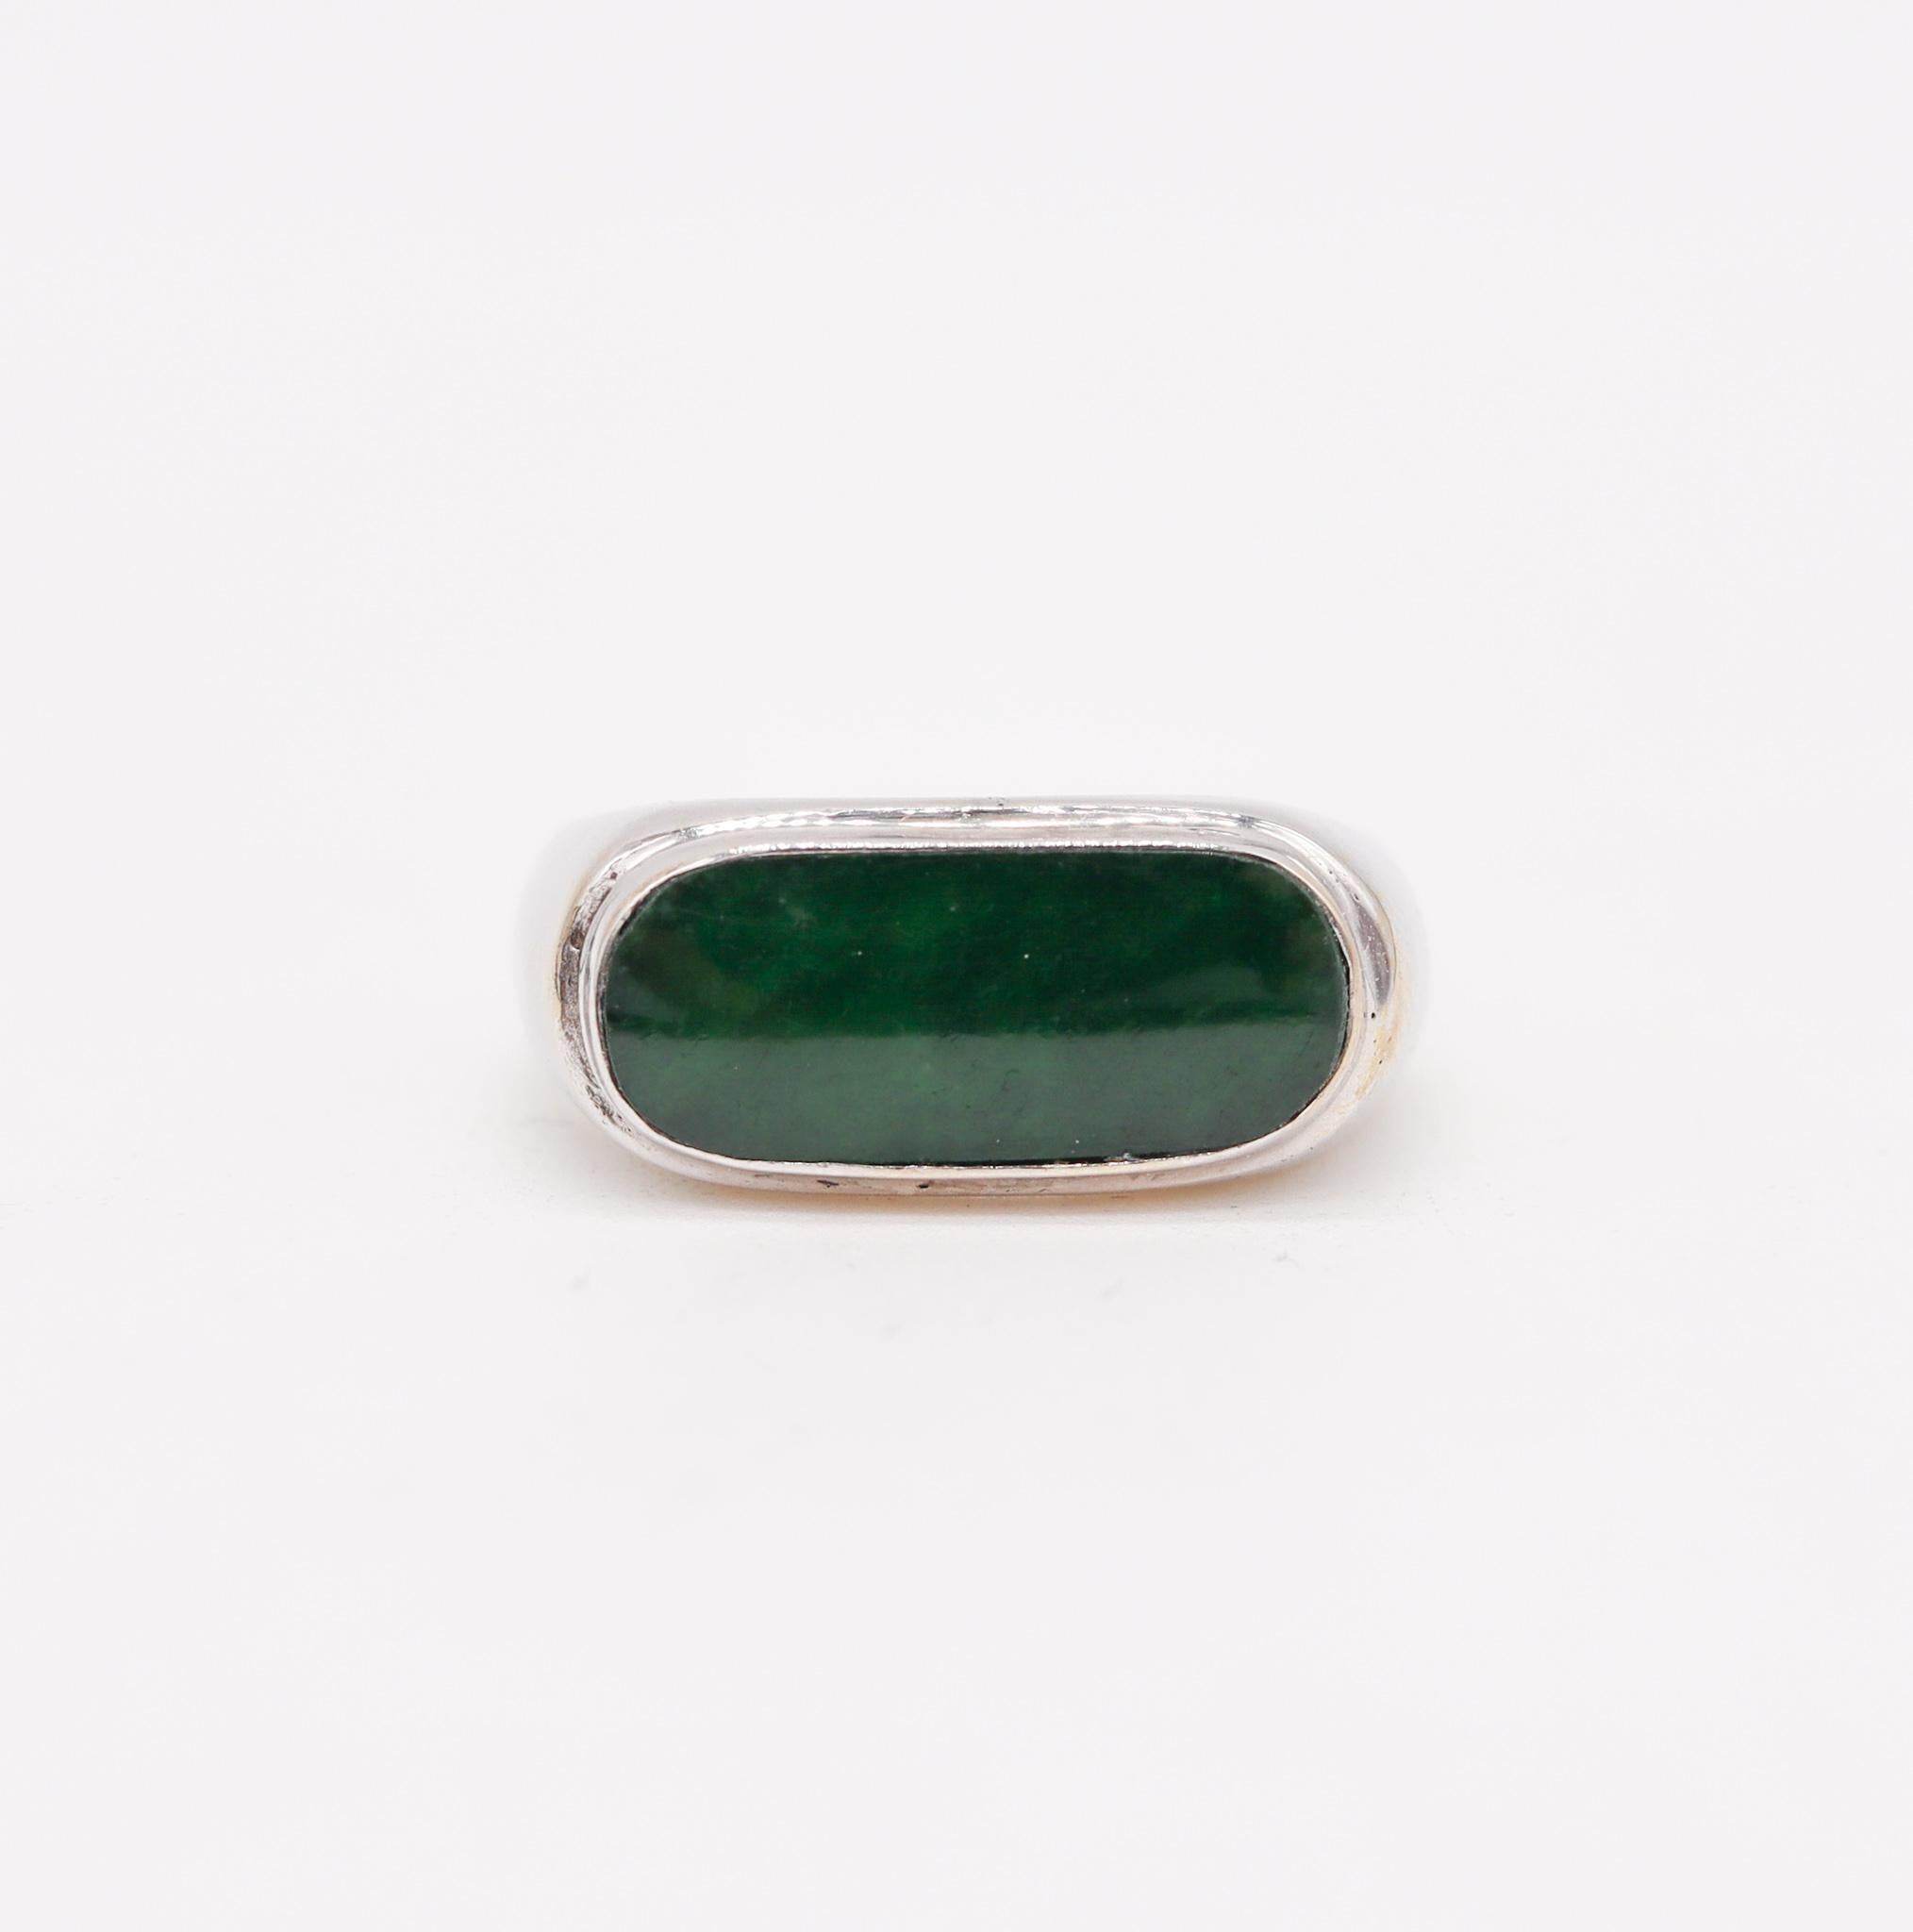 Contemporary signet ring with imperial jade.

Beautiful sleek and elegant ring crafted in solid white gold of 18 karats with high polished finish. It is mounted inside a bezel setting with one fancy cabochon cut (2 x 14 x 6 mm) of a natural imperial